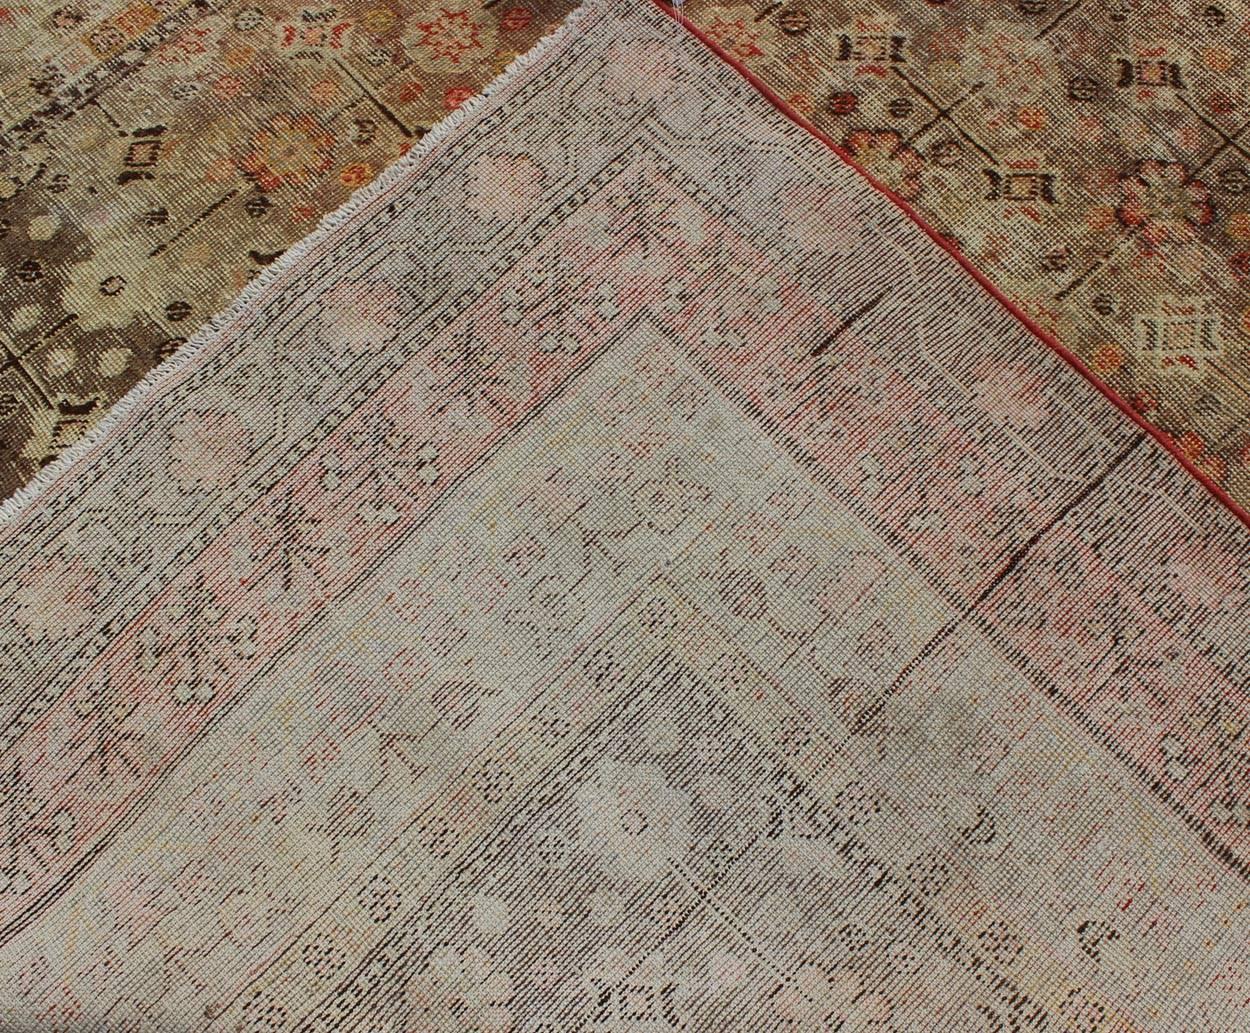 20th Century Exquisite Antique Khotan Rug with Intricate All-Over Sub-Geometric Floral Design For Sale